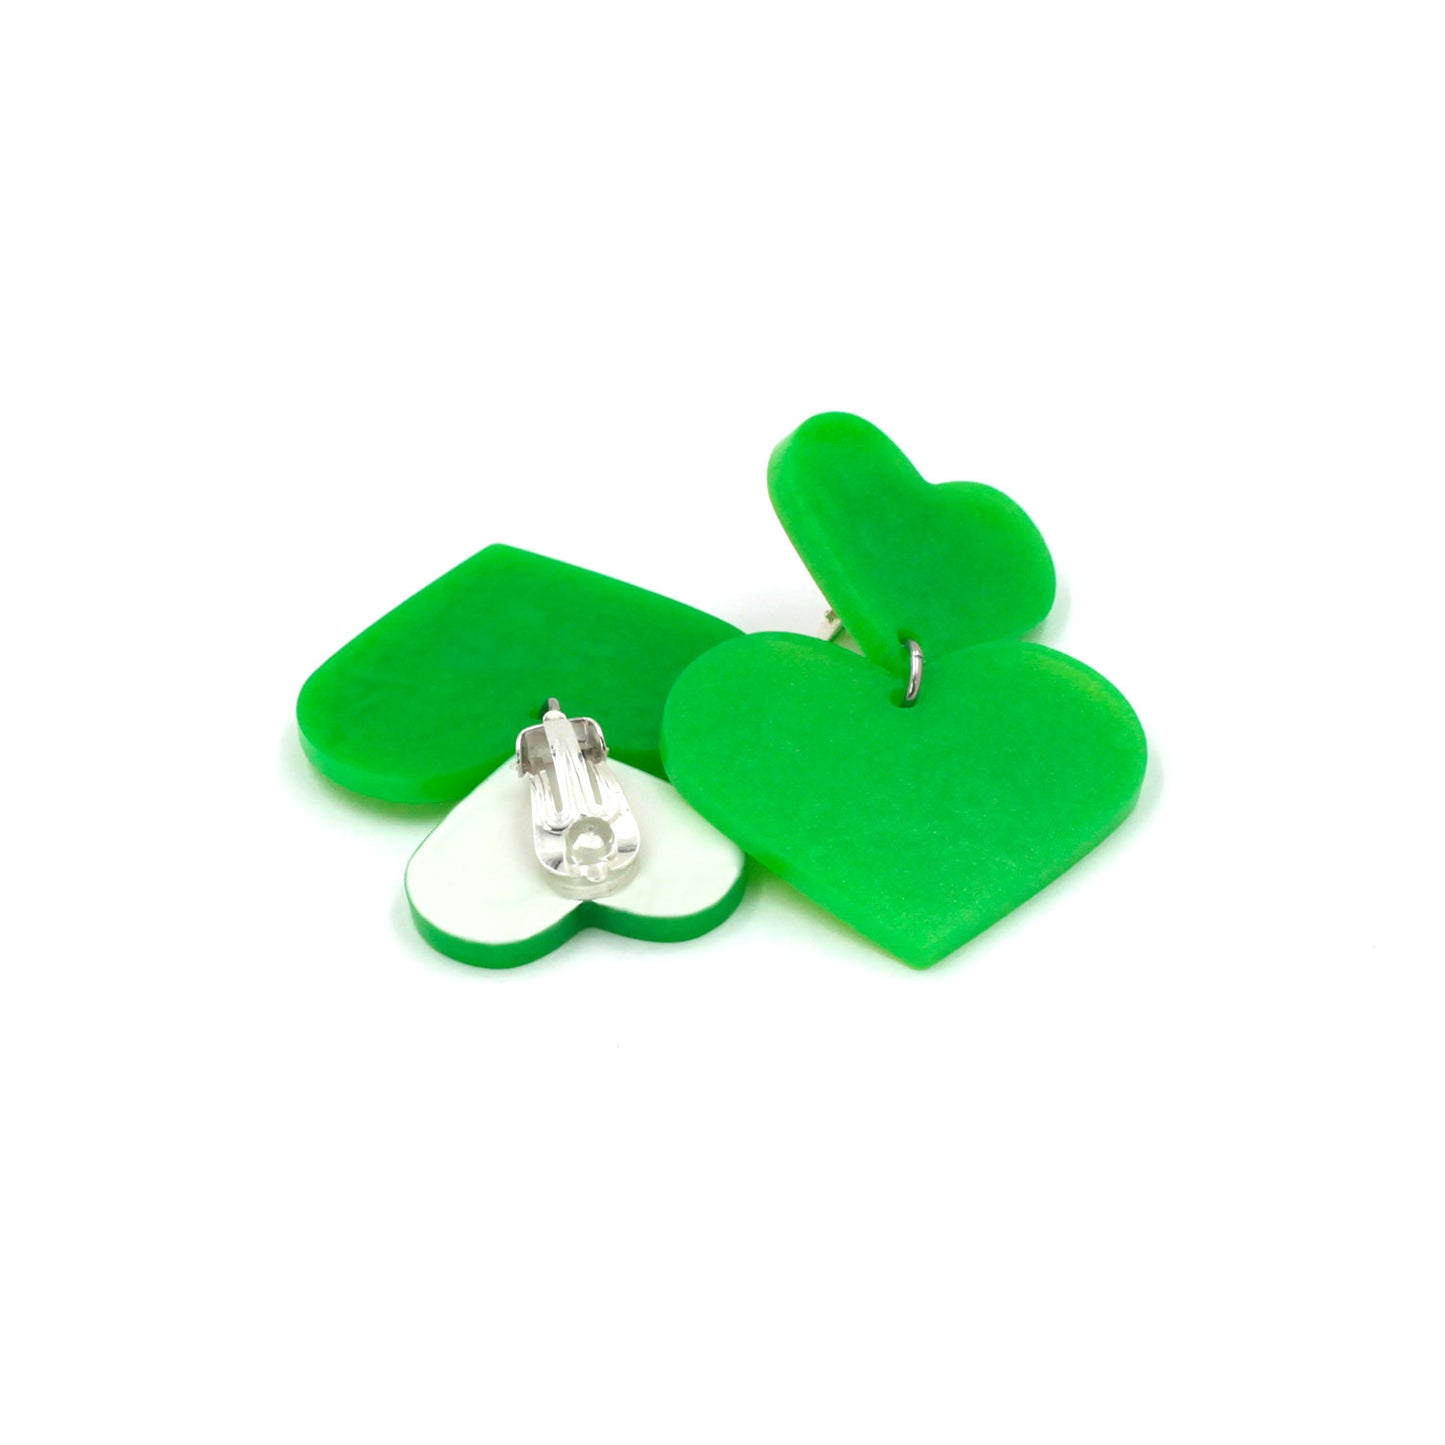 lime green hearts earrings on a white background. one is on its back, there is a clip on earring with a silicone pad protection. the top of the earring is white, the pendant heart is the same lime green from the front.